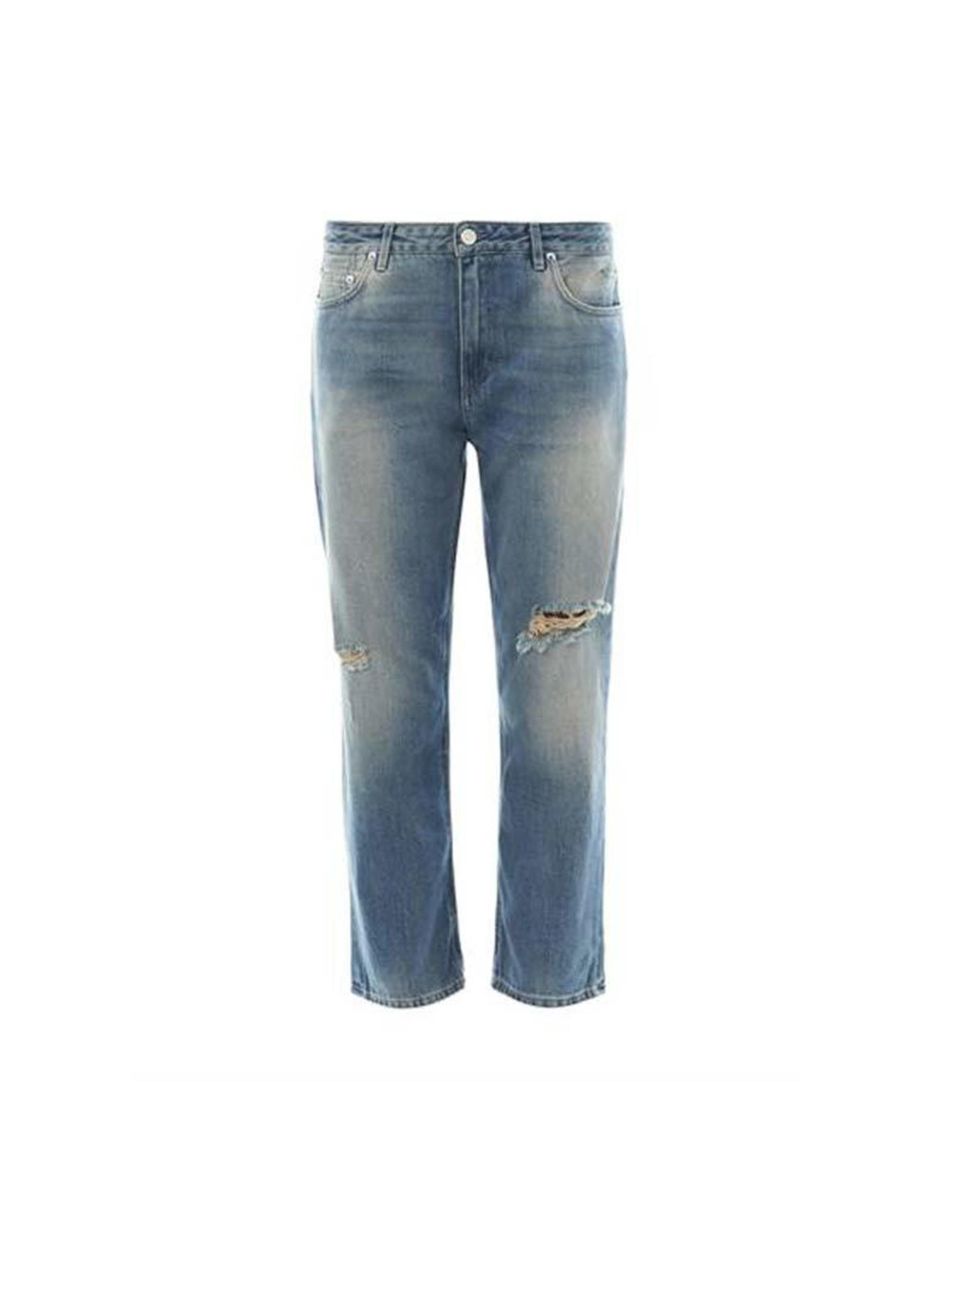 <p>The boyfriend jean from Acne, now £130 available at <a href="http://www.matchesfashion.com/product/187968">Matches </a></p>